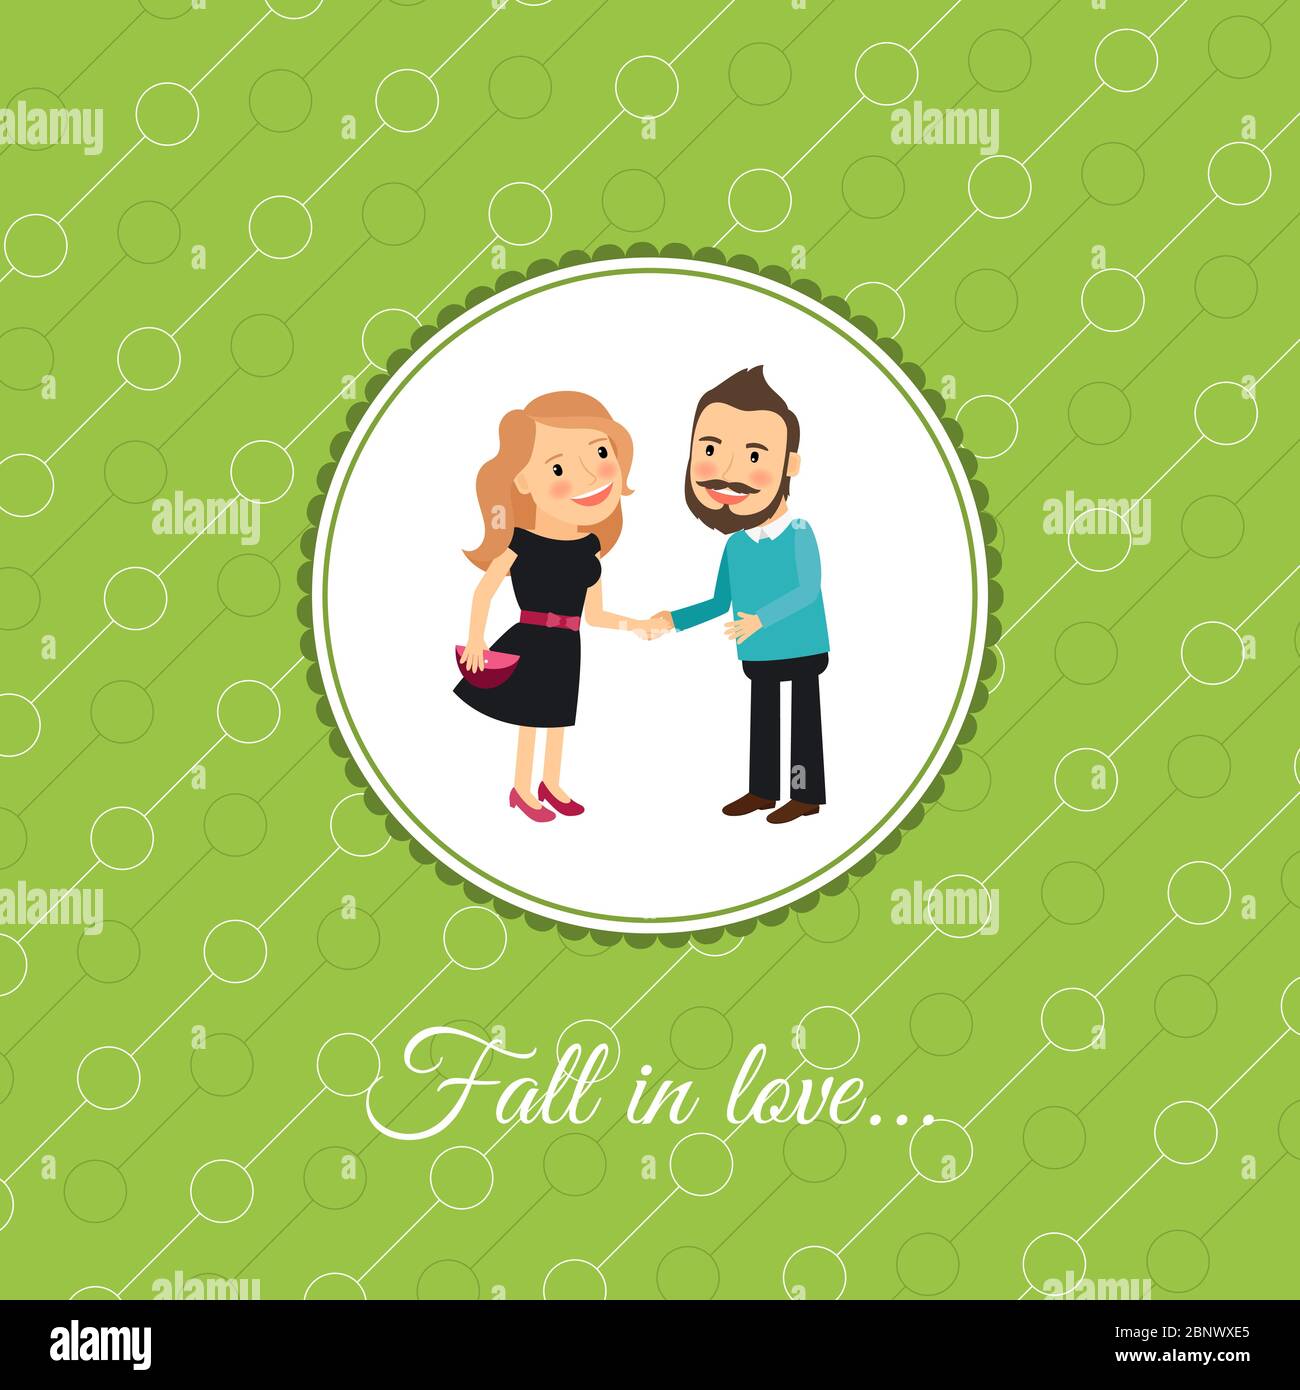 Fall in love couple, valintines day card template with green background. Vector illustration Stock Vector